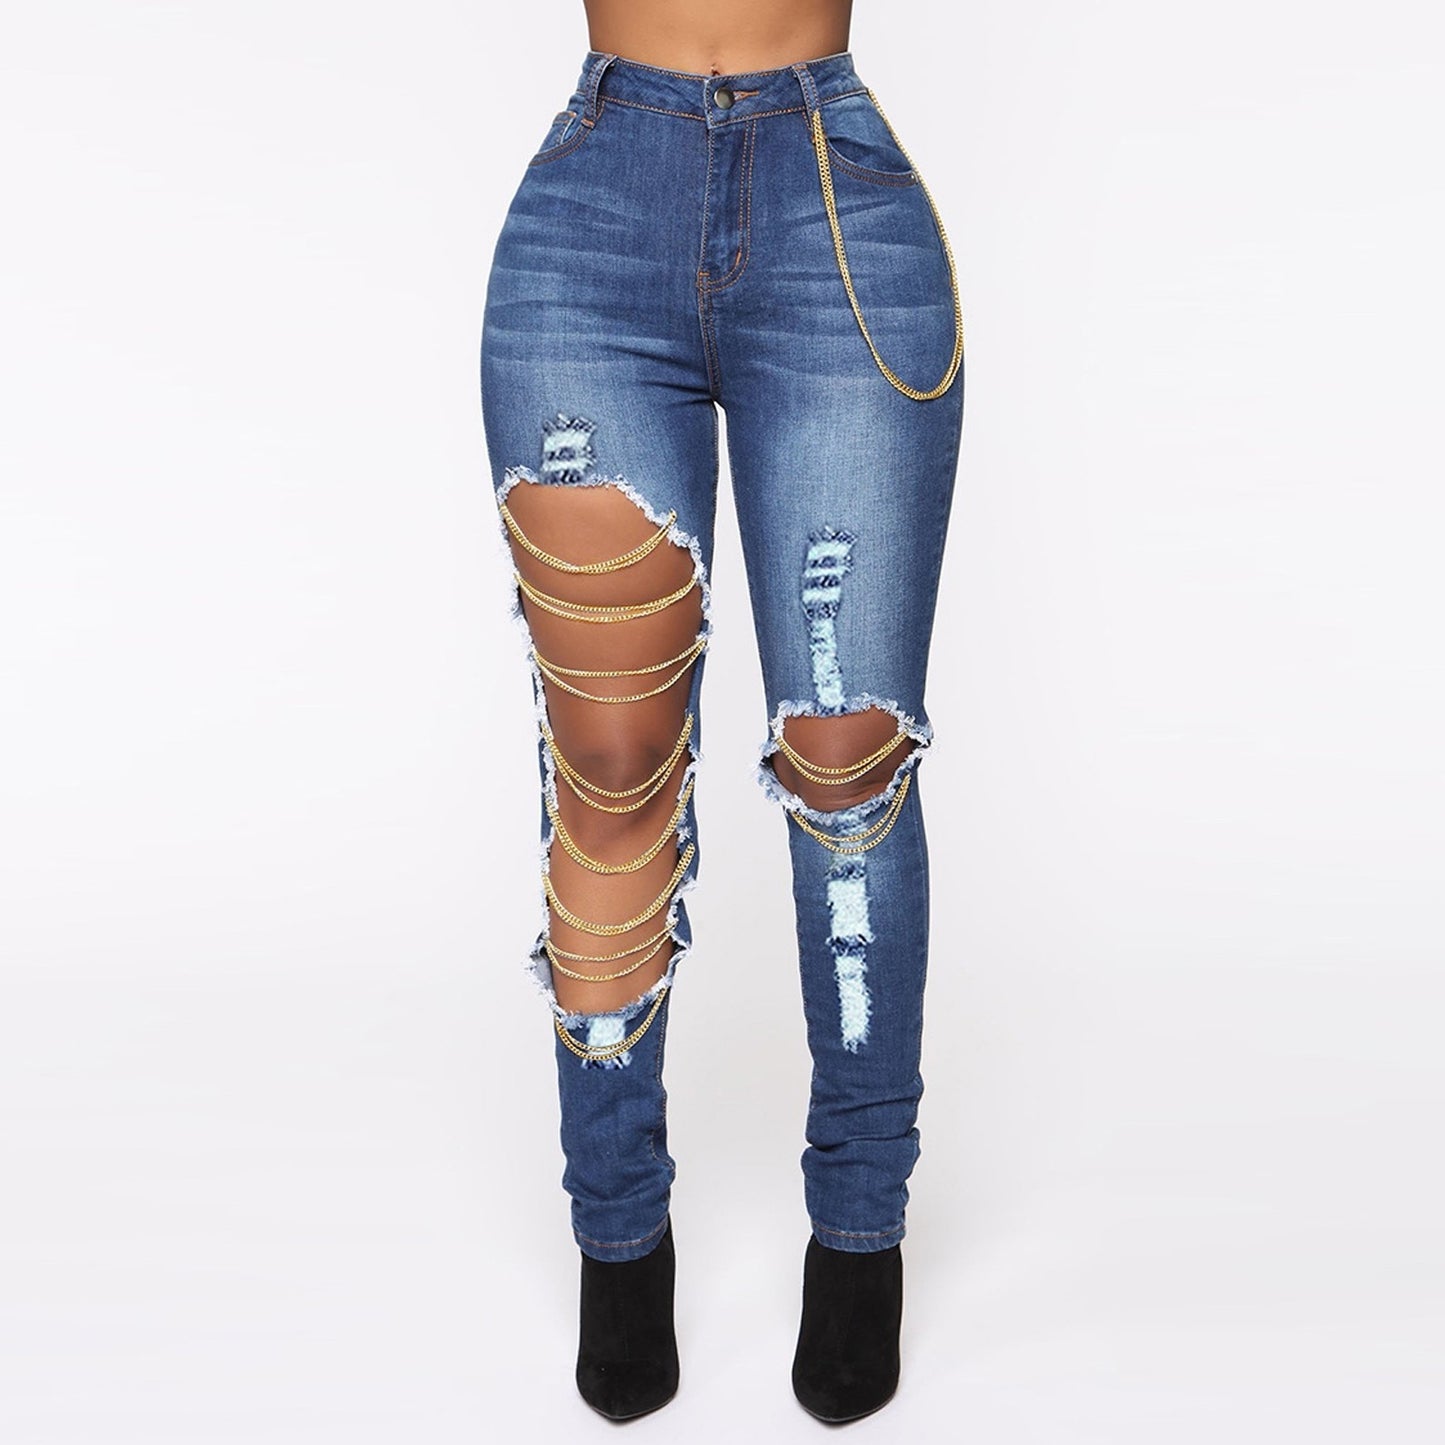 Irregular Holes Jeans With Chain Hanging Slim Washed High Waist Leisure All-Match Chic Elasticity Pants